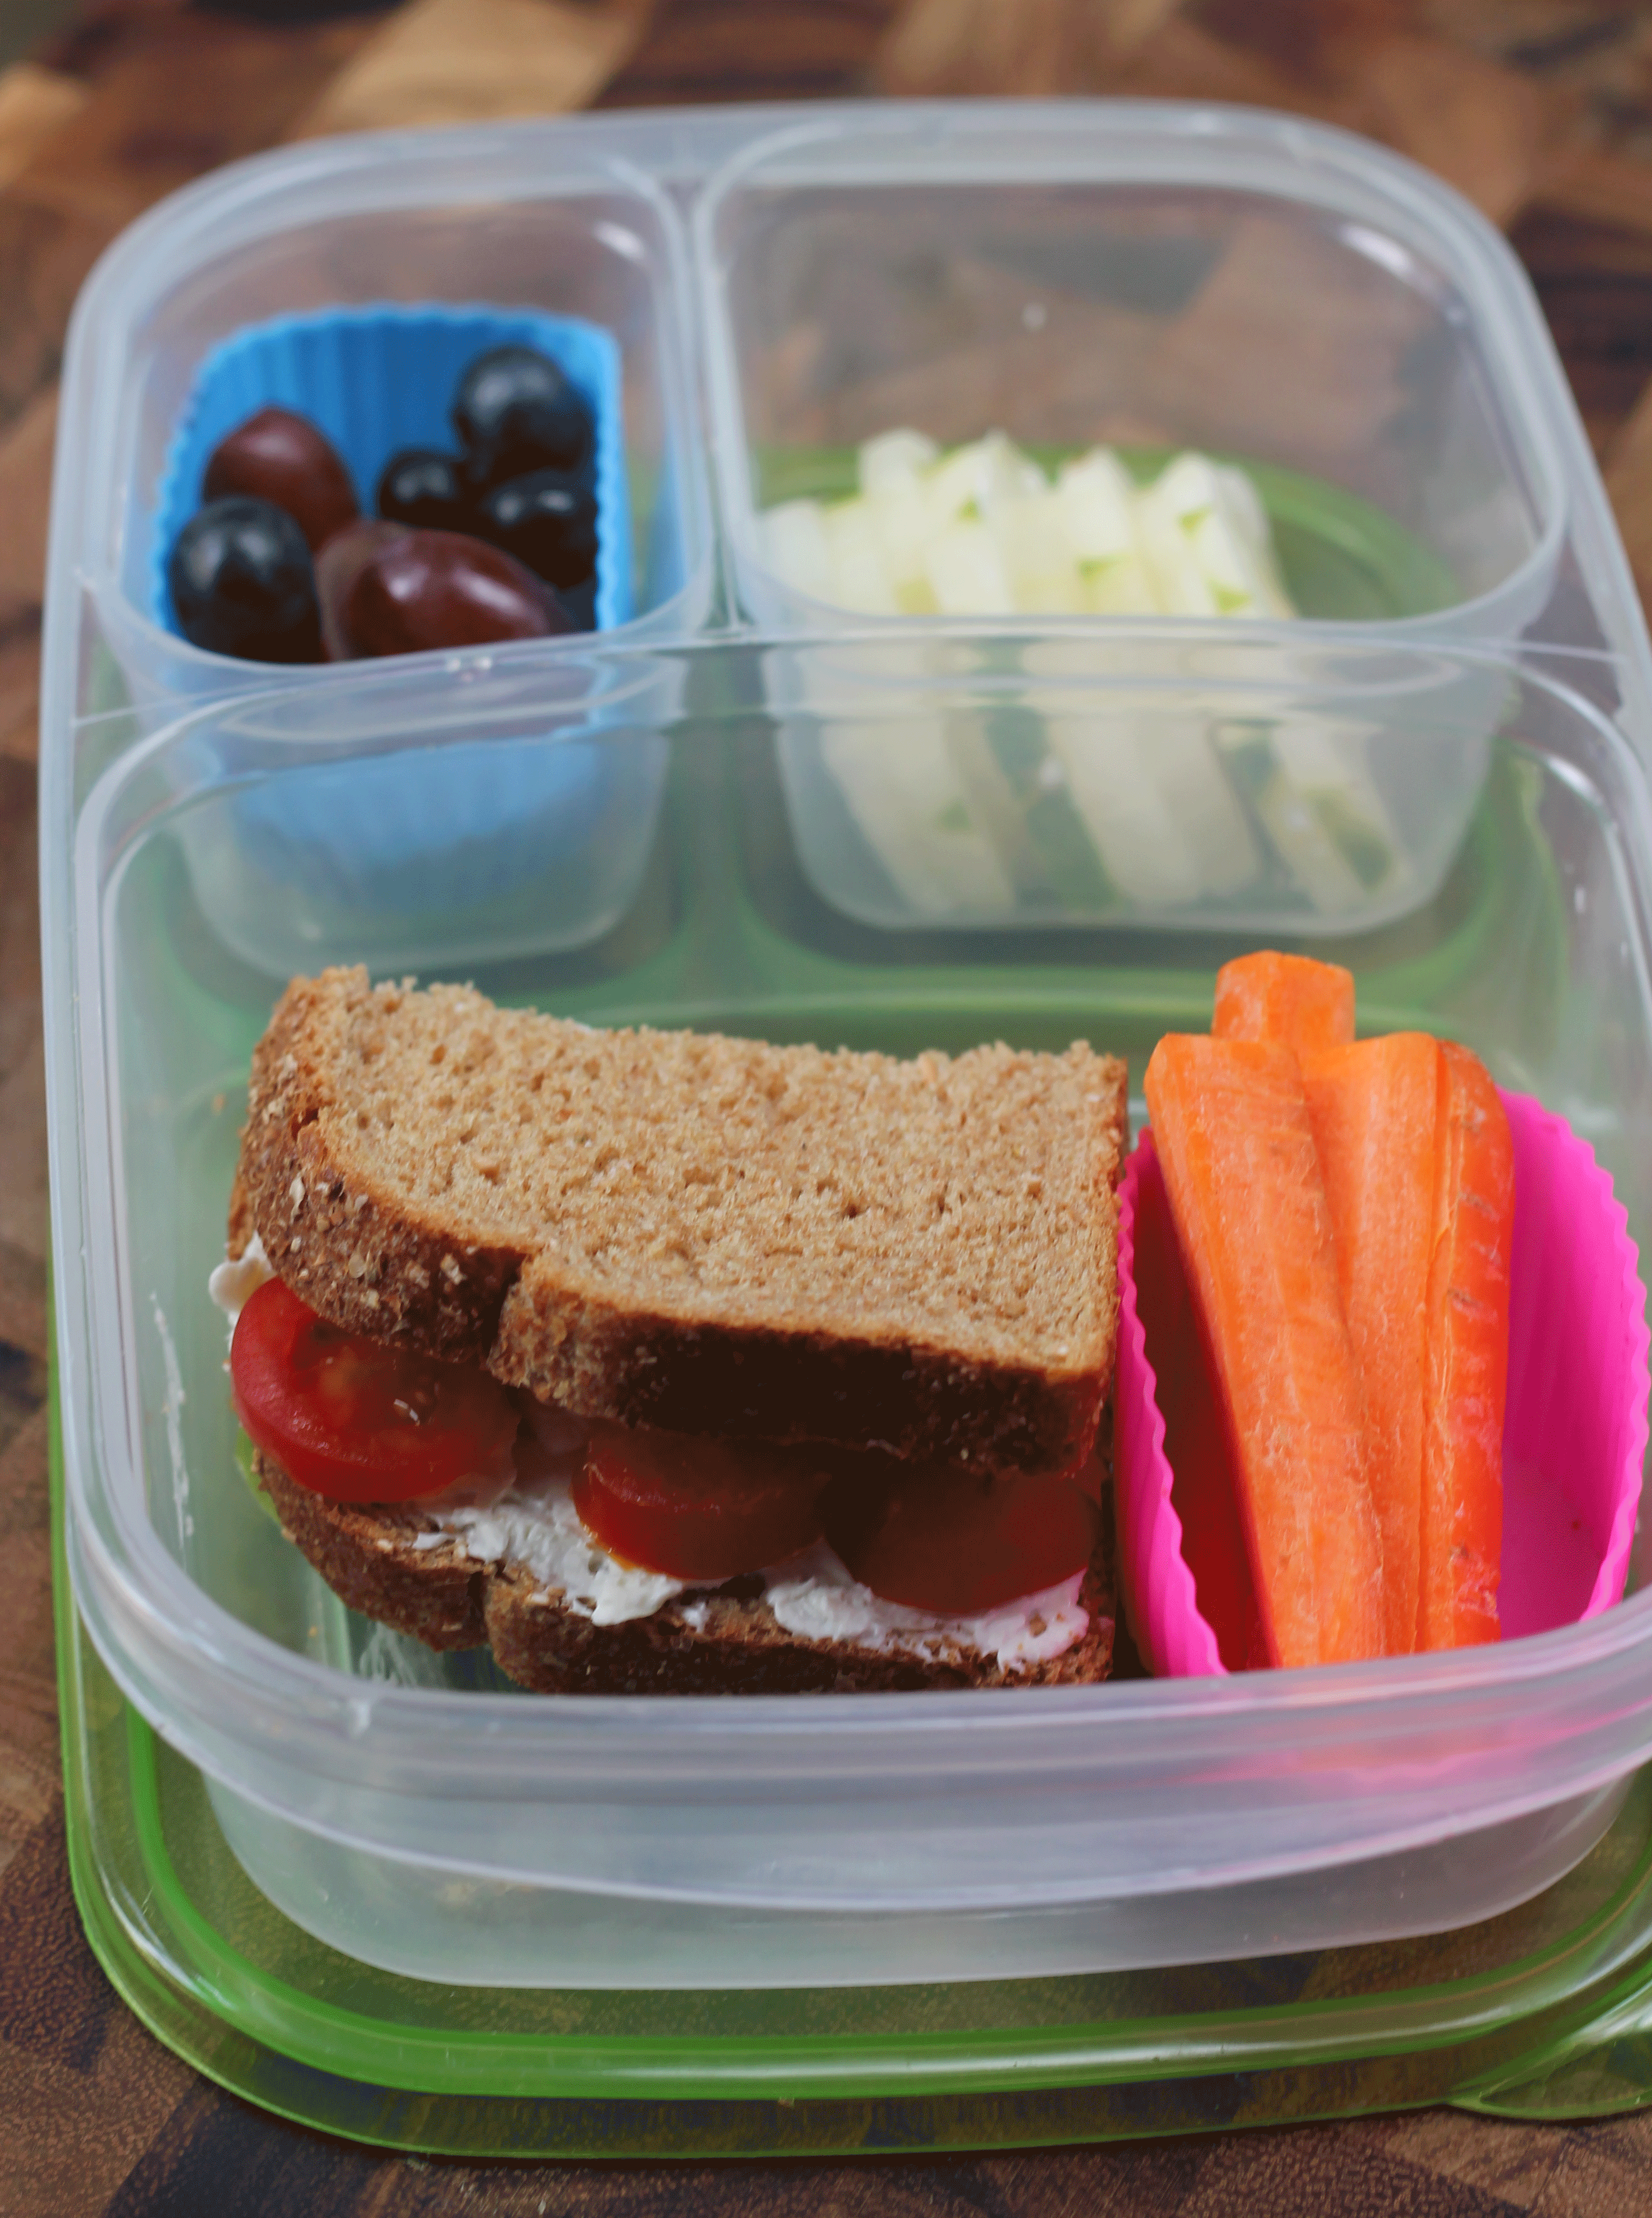 Back to School Lunch Ideas- Tomato and Cream Cheese Sandwich. A great lunch idea! You can top almost any veggie with cream cheese and the kids will love it!